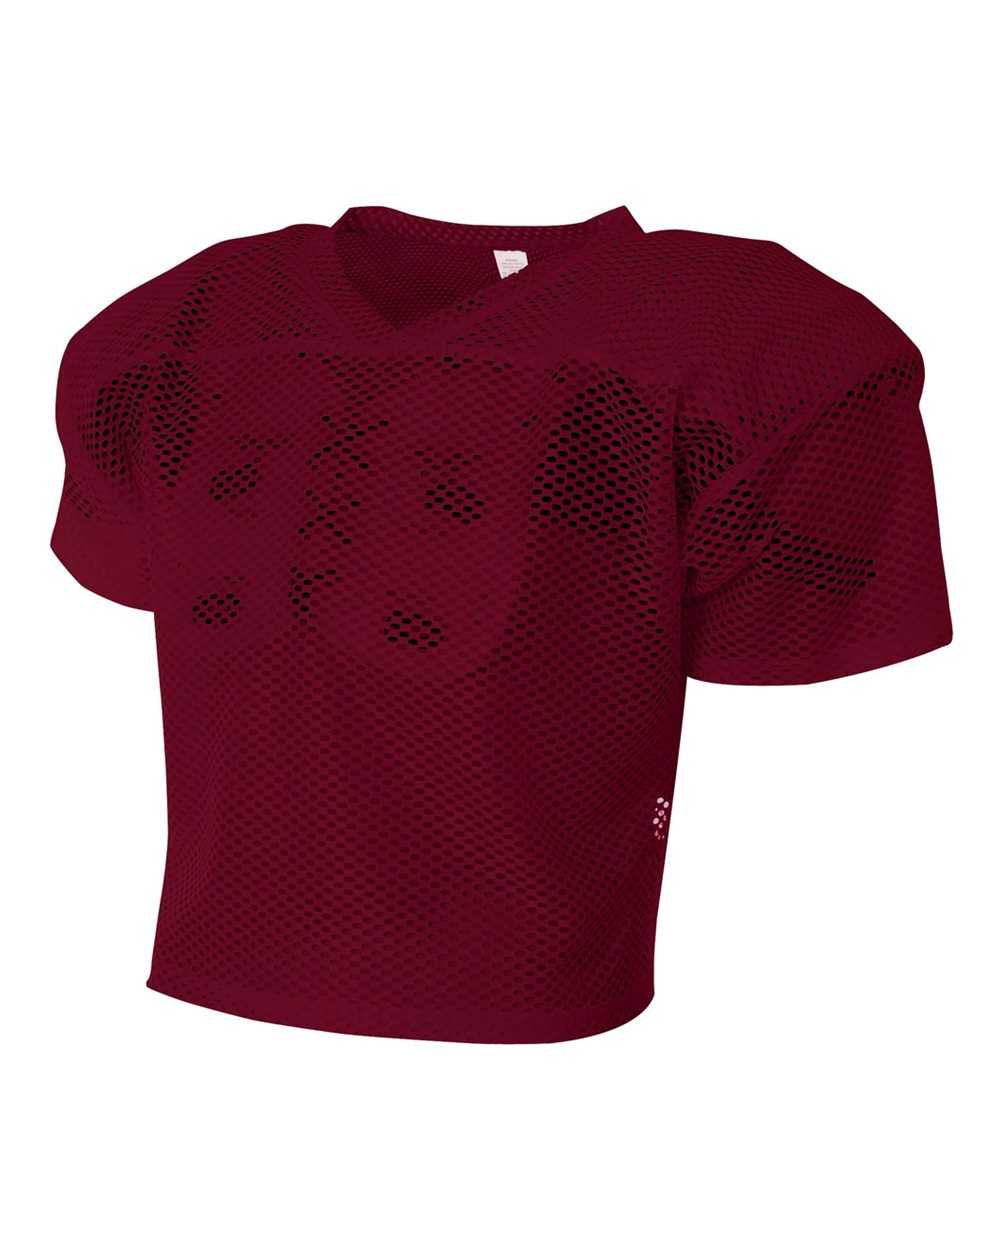 A4 N4190 All Porthole Practice Jersey - Maroon - HIT a Double